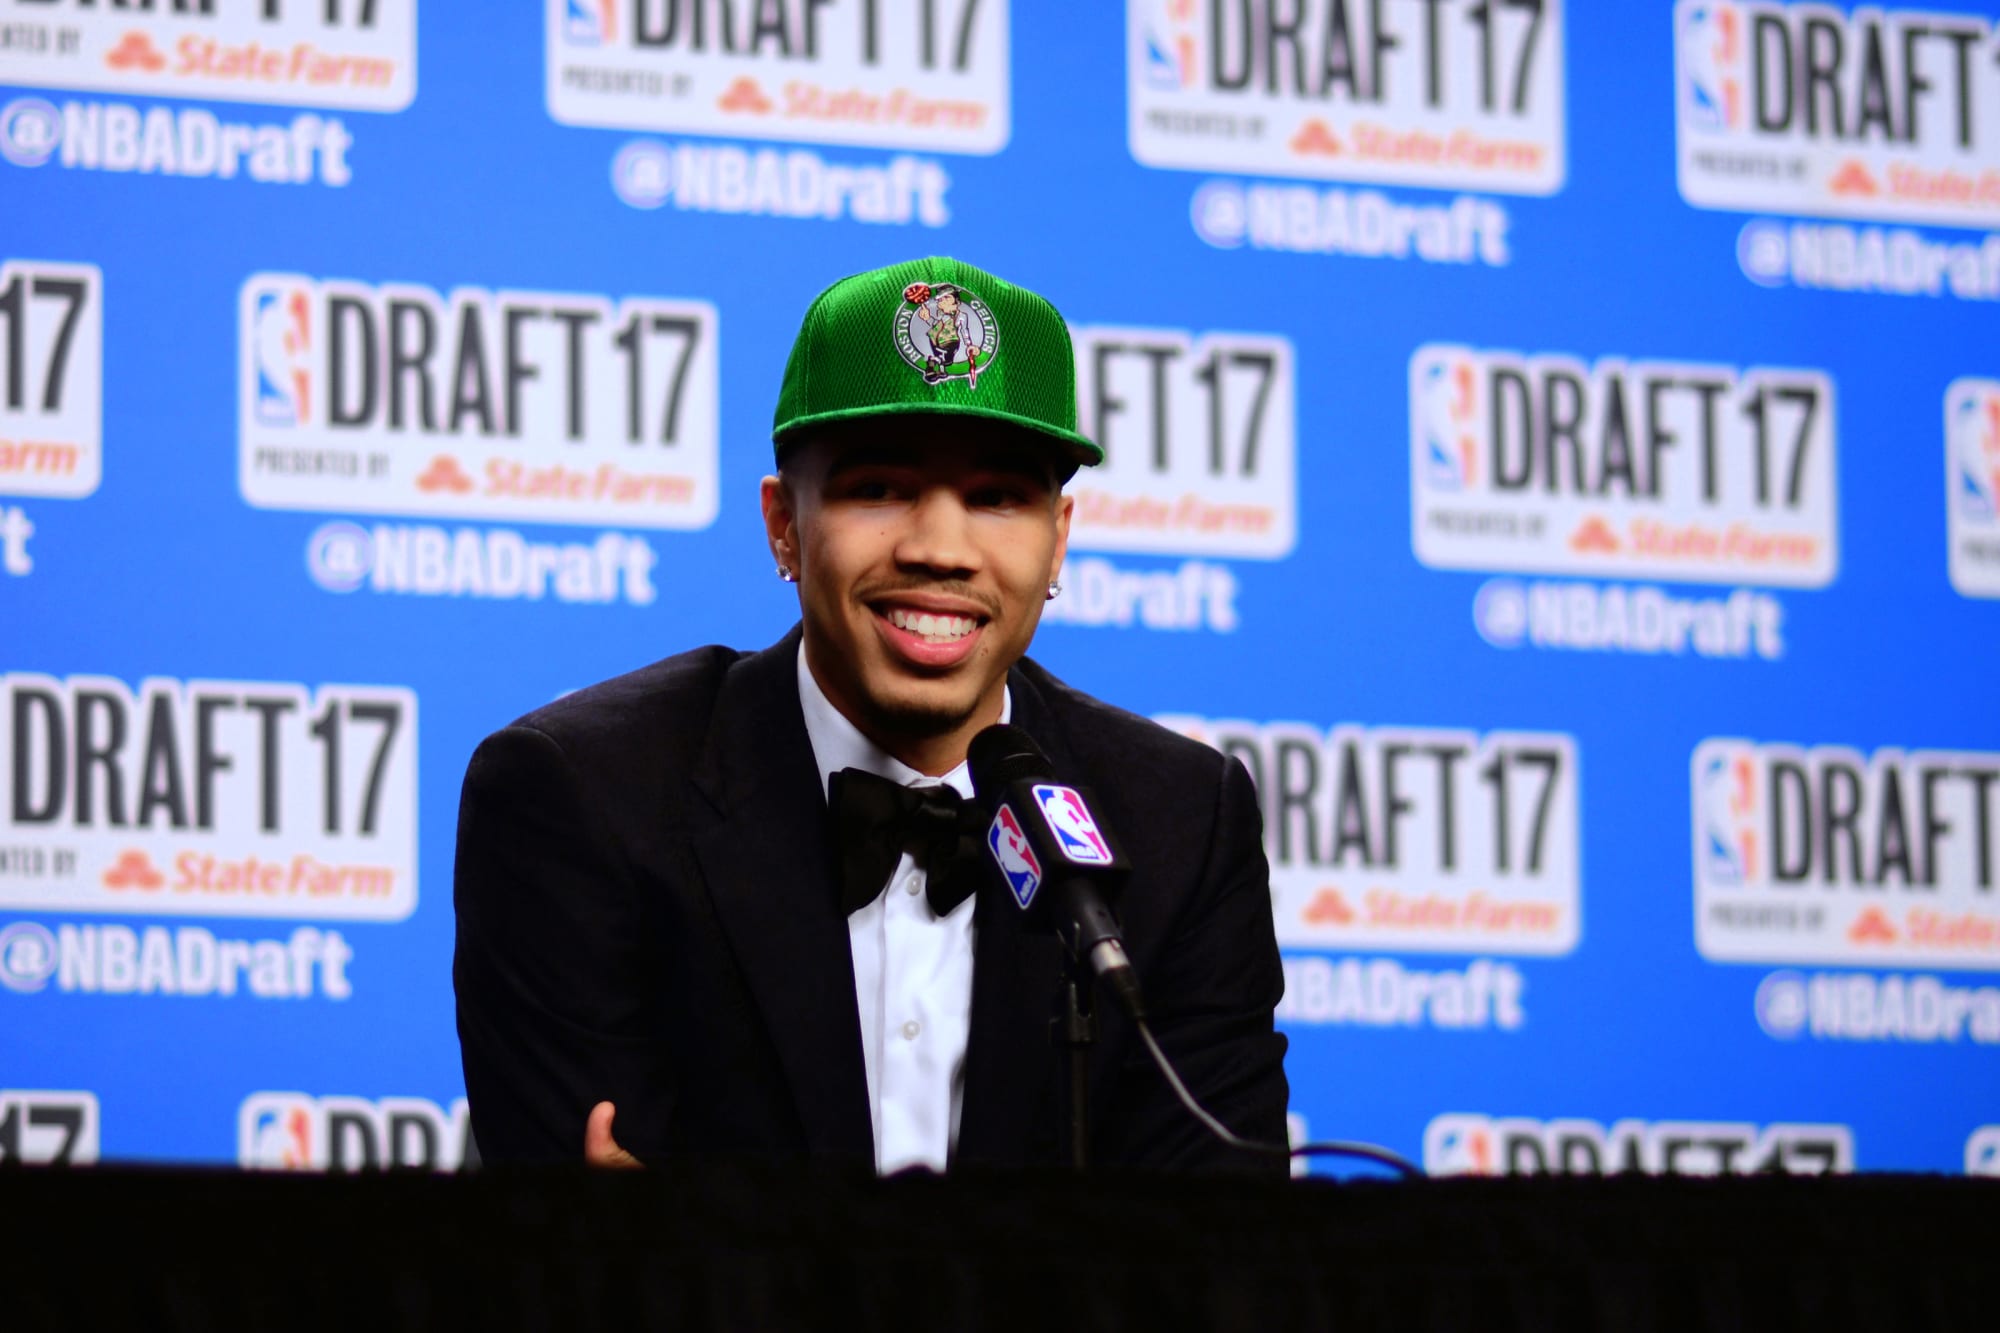 Reviewing the 2017 NBA Draft by Danny Ainge and the Boston Celtics